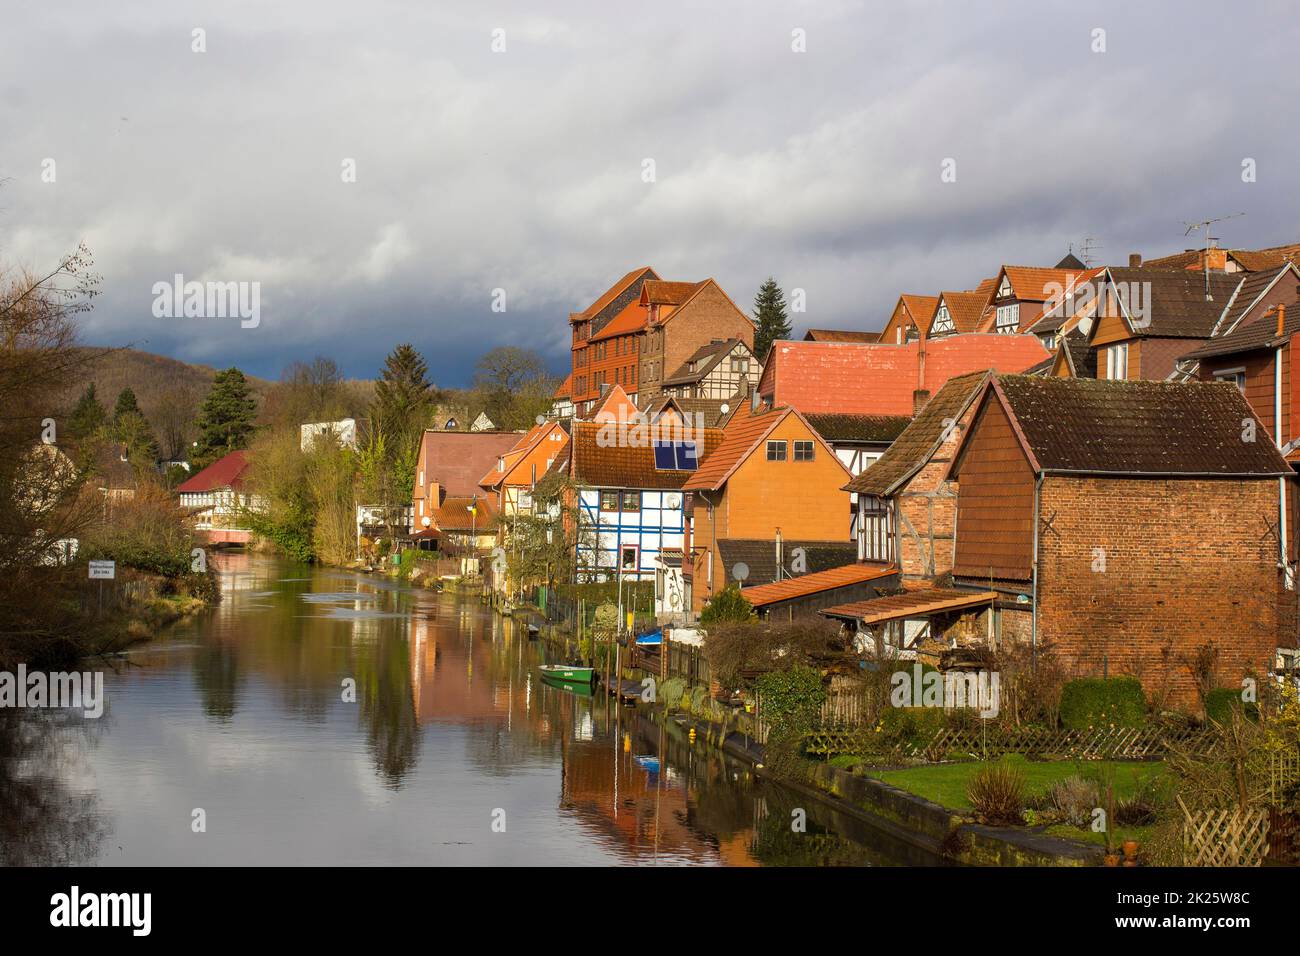 The Town of Bad Sooden-Allendorf in the Werra Valley in Germany Stock Photo